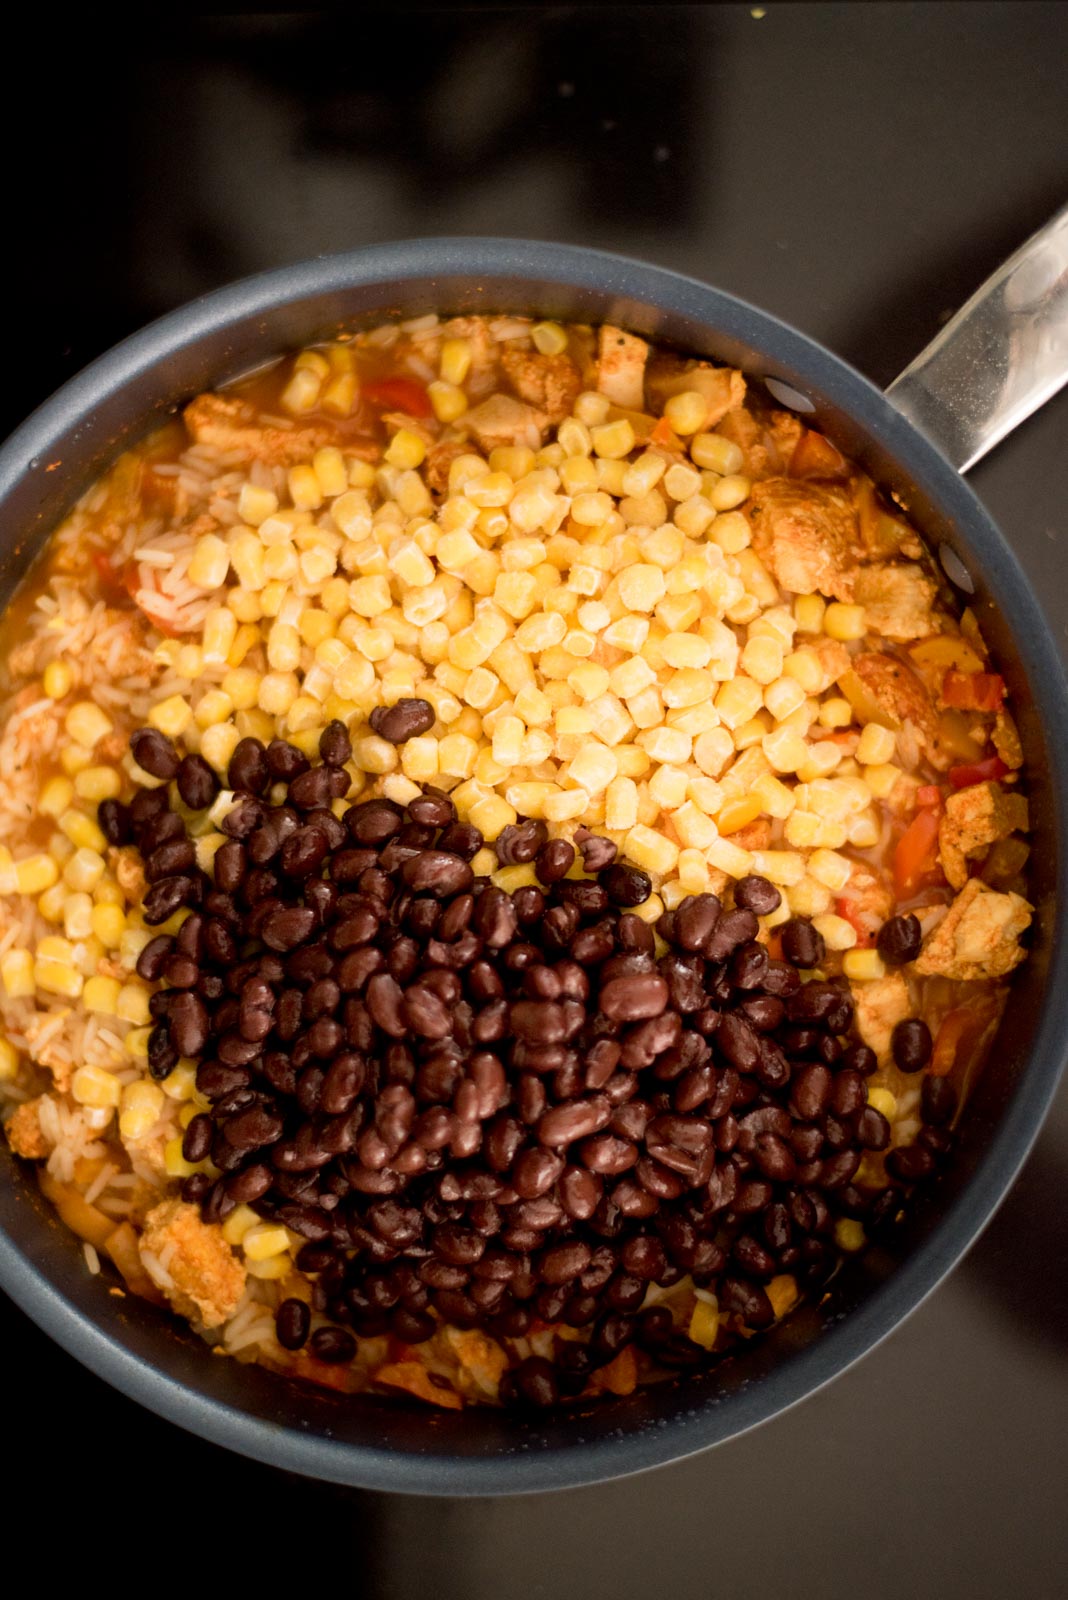 Corn and black beans added to the skillet with the cooked chicken, bell peppers, and rice on the stove.